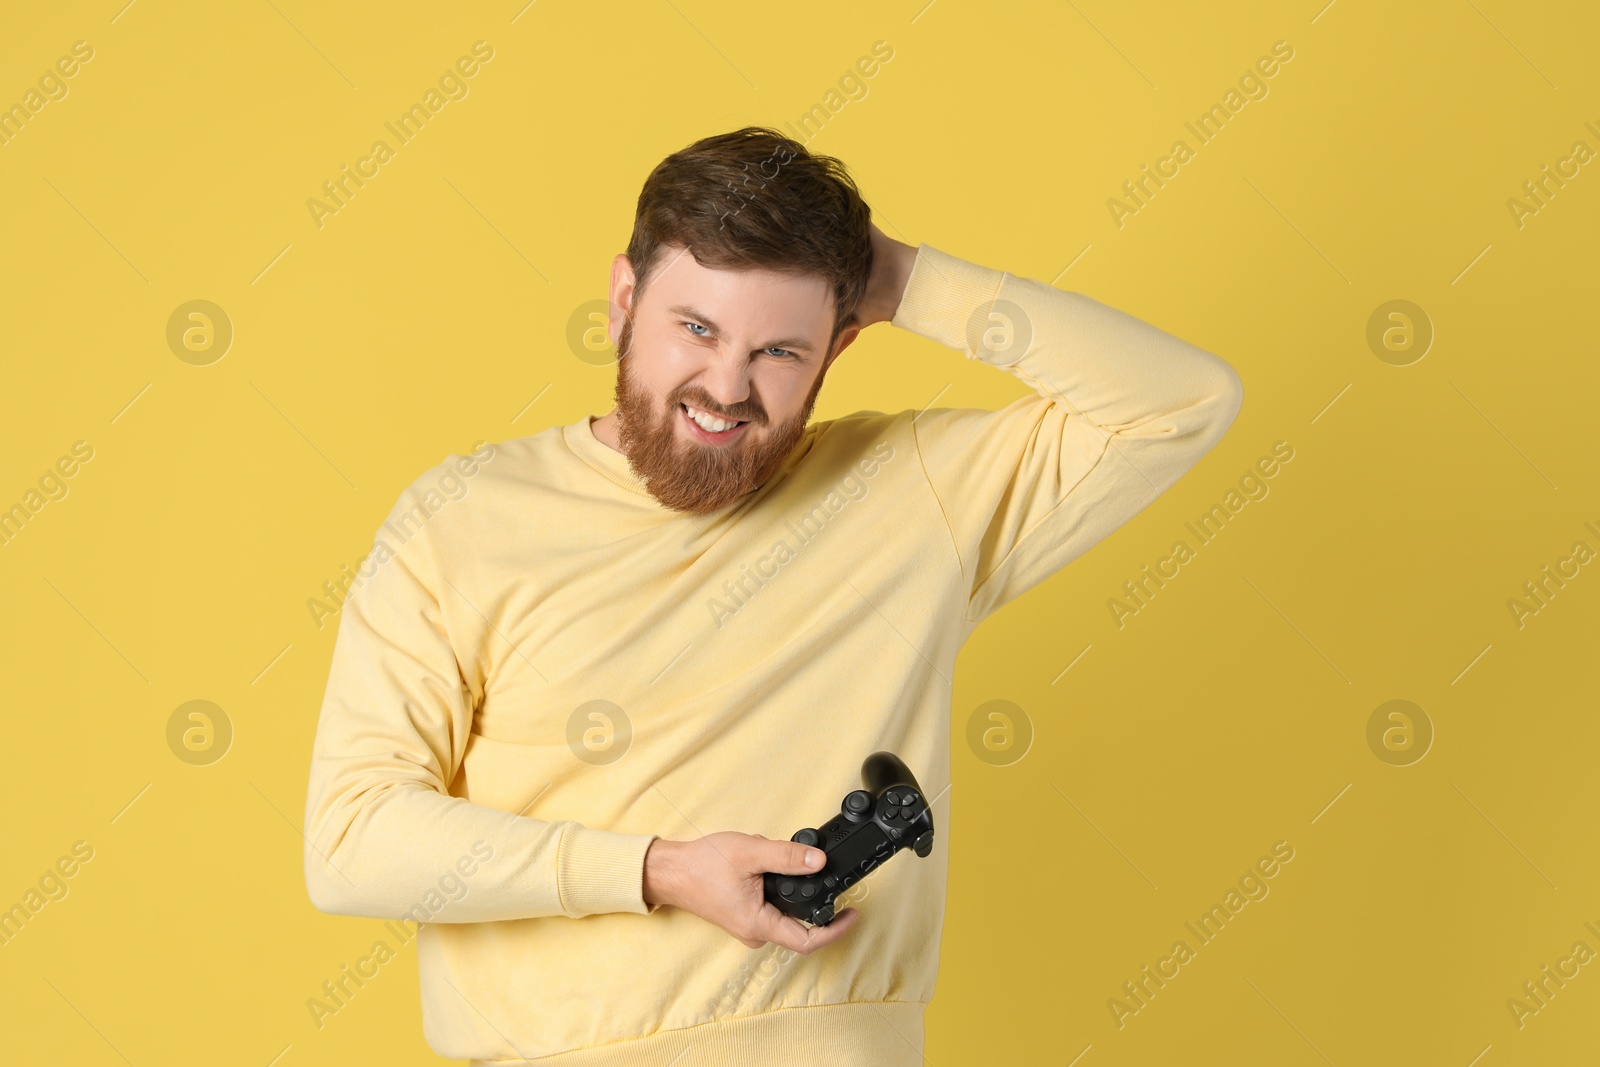 Photo of Emotional man with game controller on pale yellow background